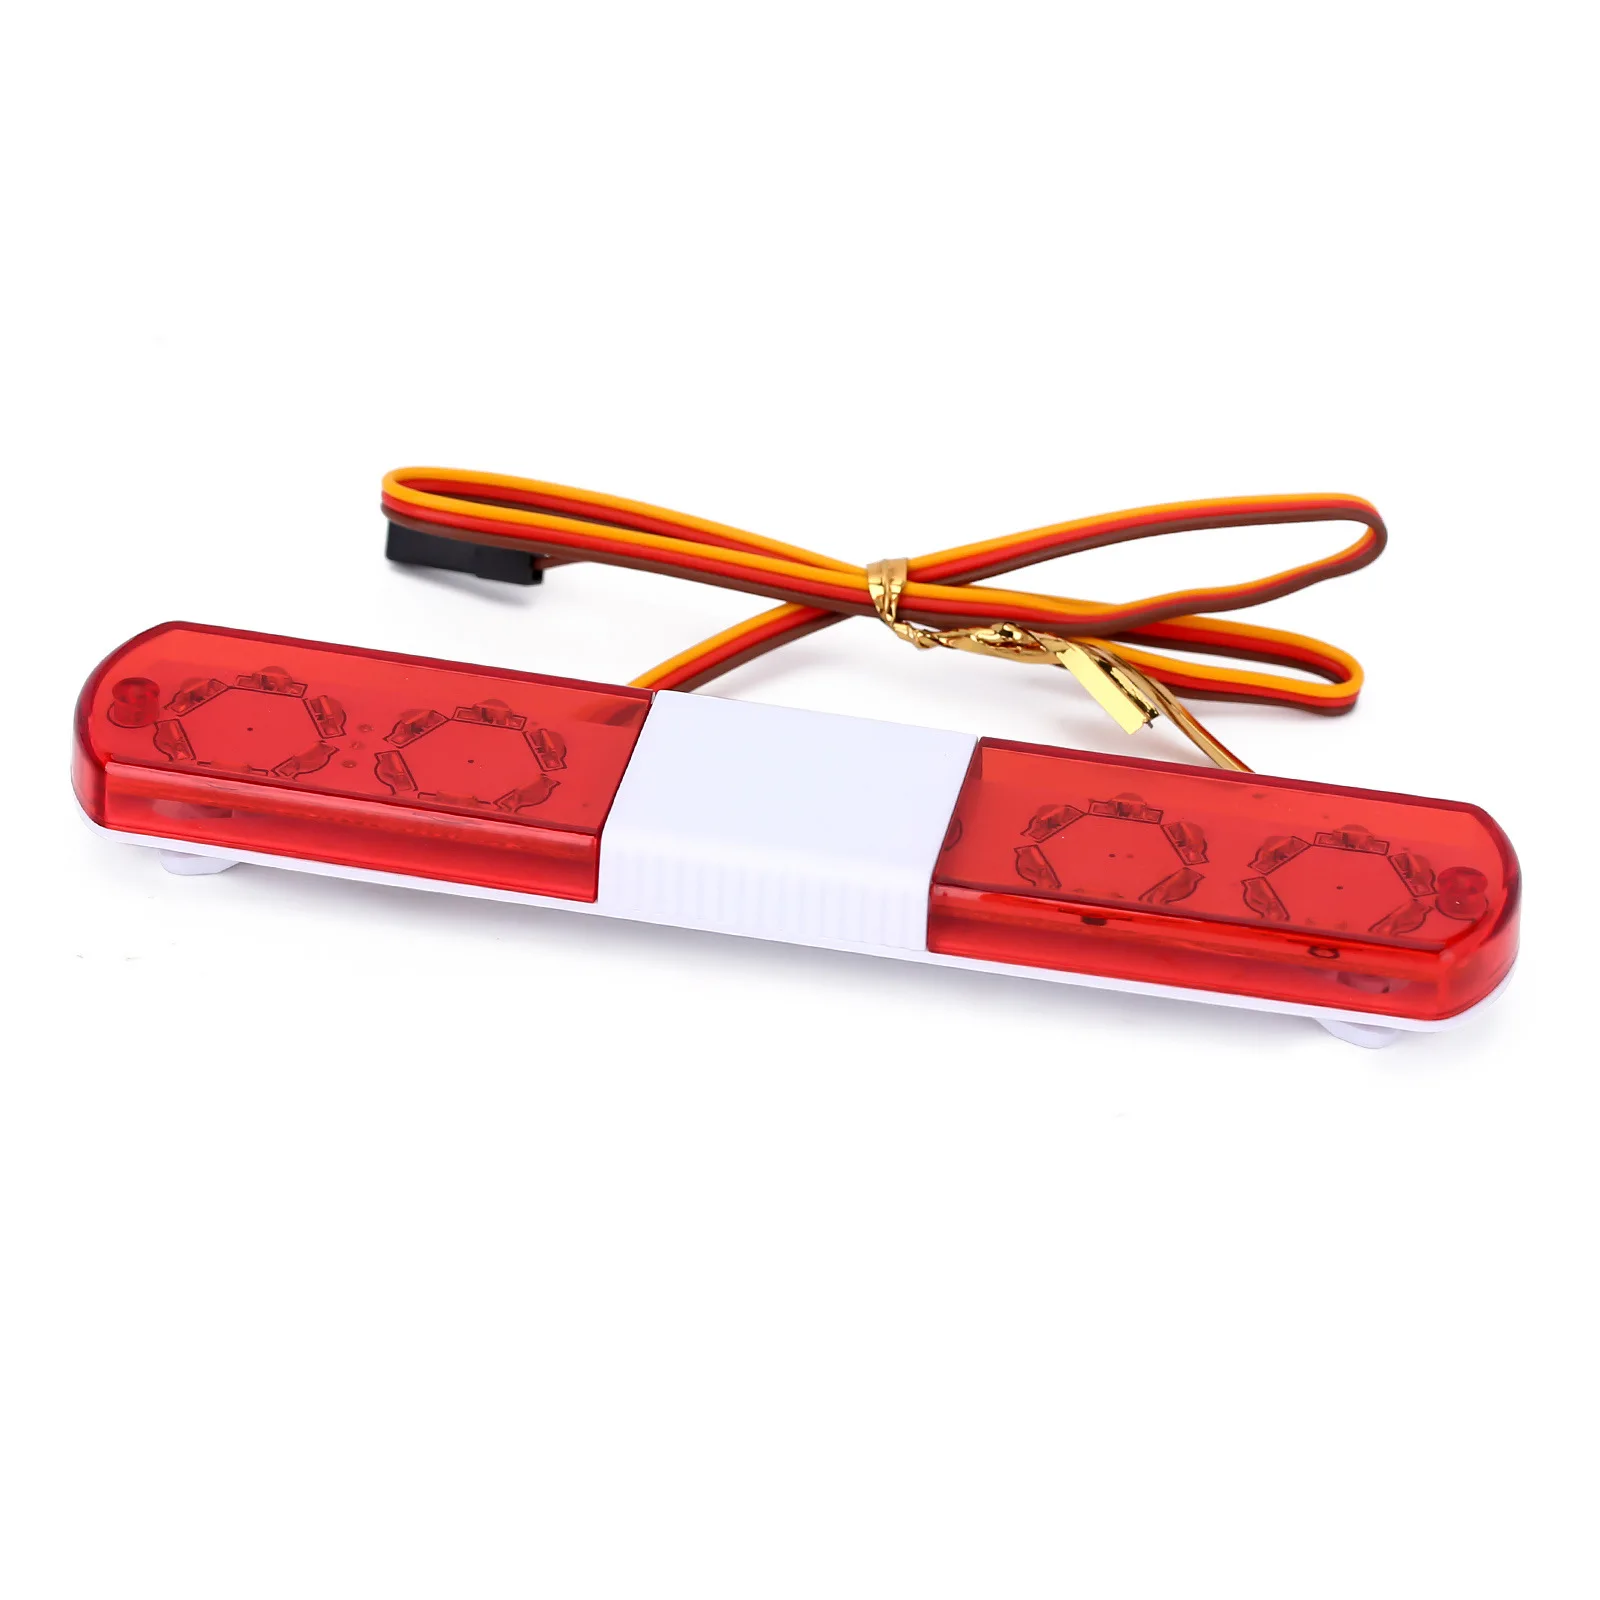 Upgrade accessories for 1 / 10, 1 / 12, 1 / 16 RC vehicles: shell simulation alarm lamp, engineering lamp enlarge